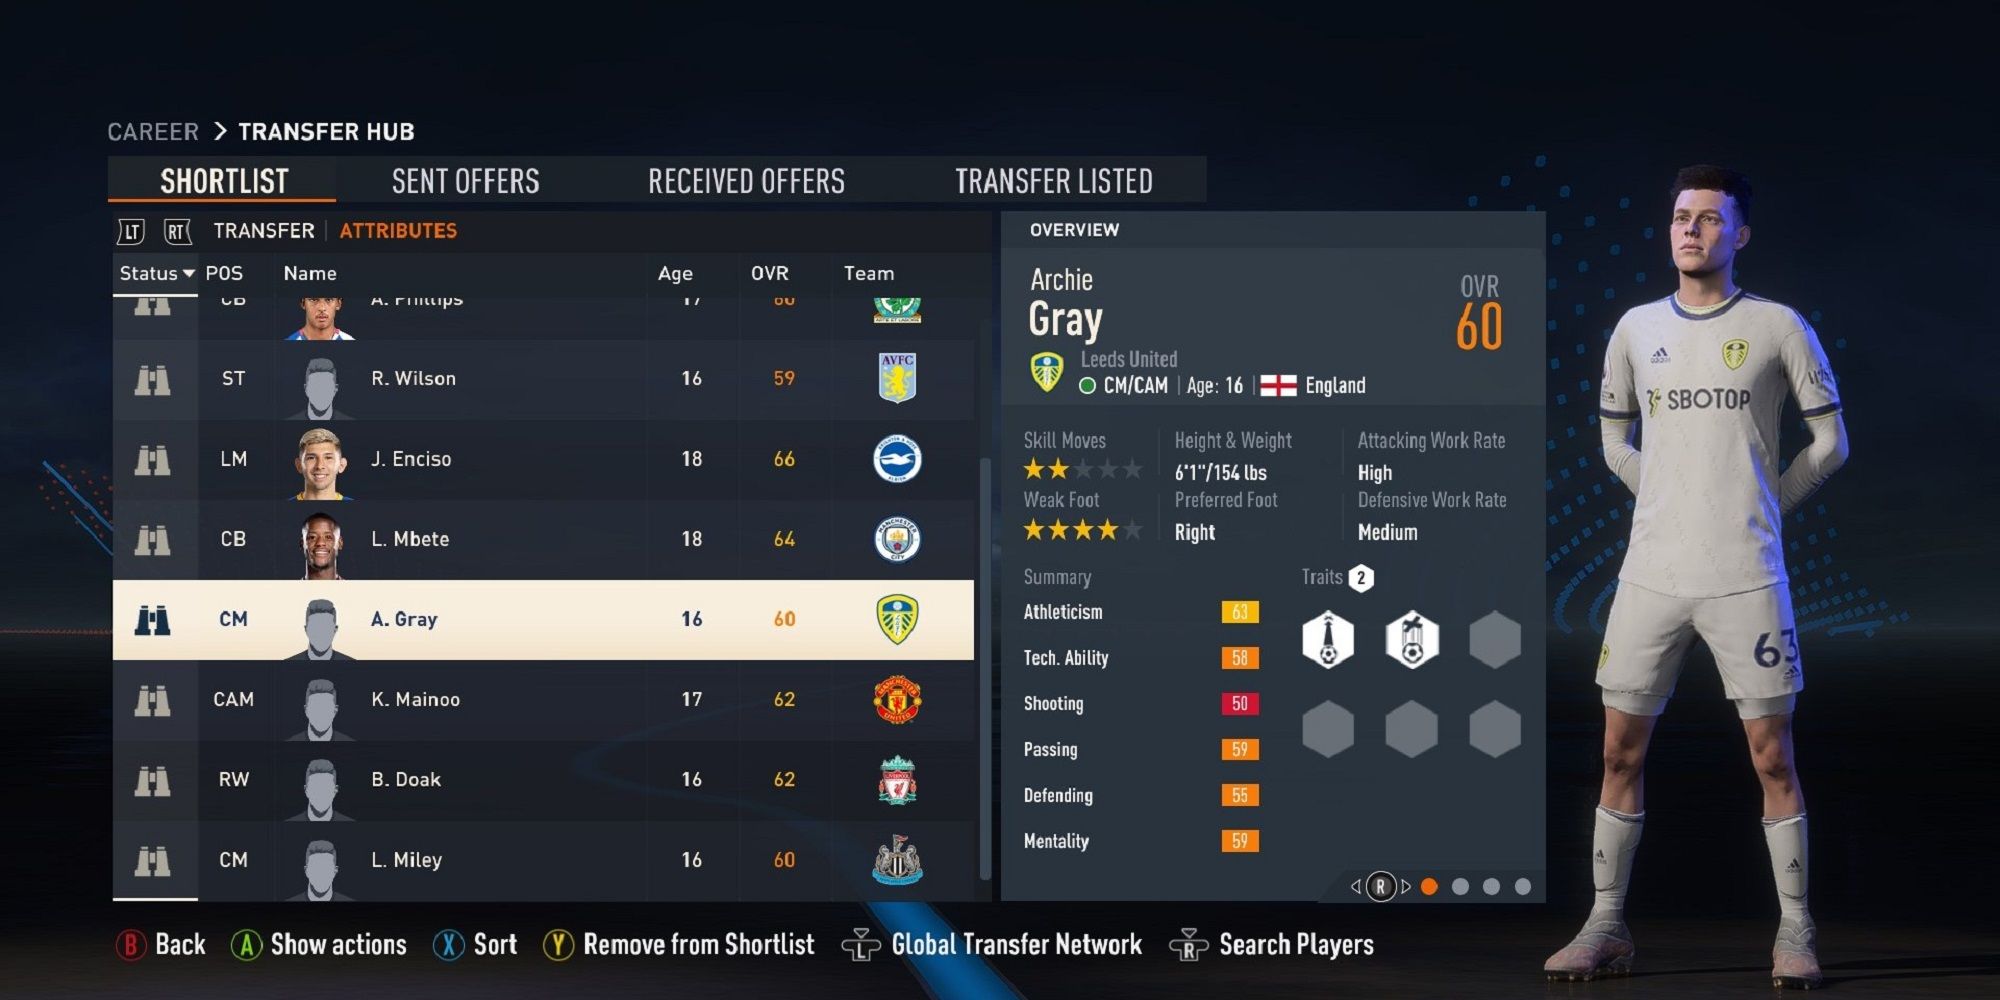 An image of Archie Gray in FIFA 23